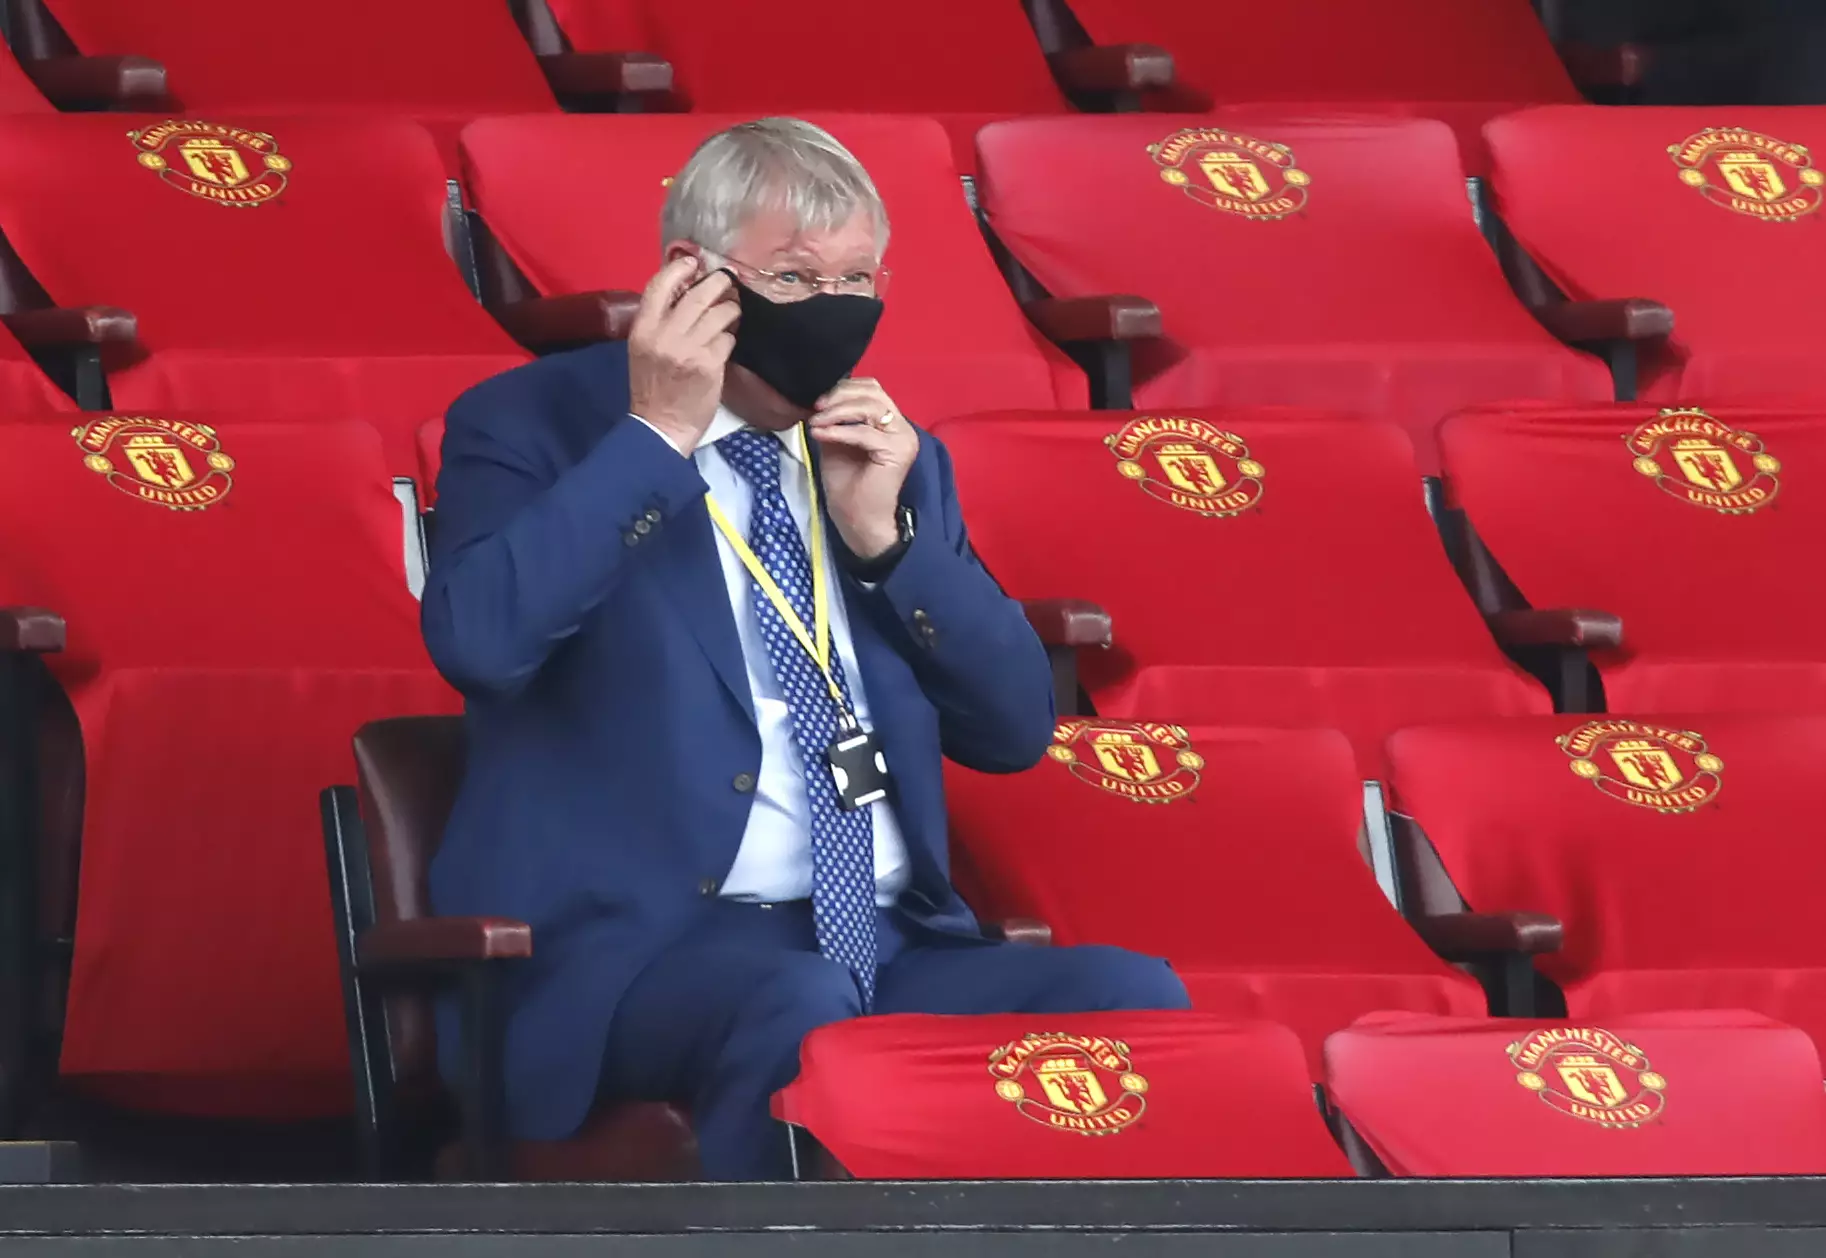 Fergie has still been in attendance as a club director but hasn't been able to talk to Bruno Fernandes. Image: PA Images